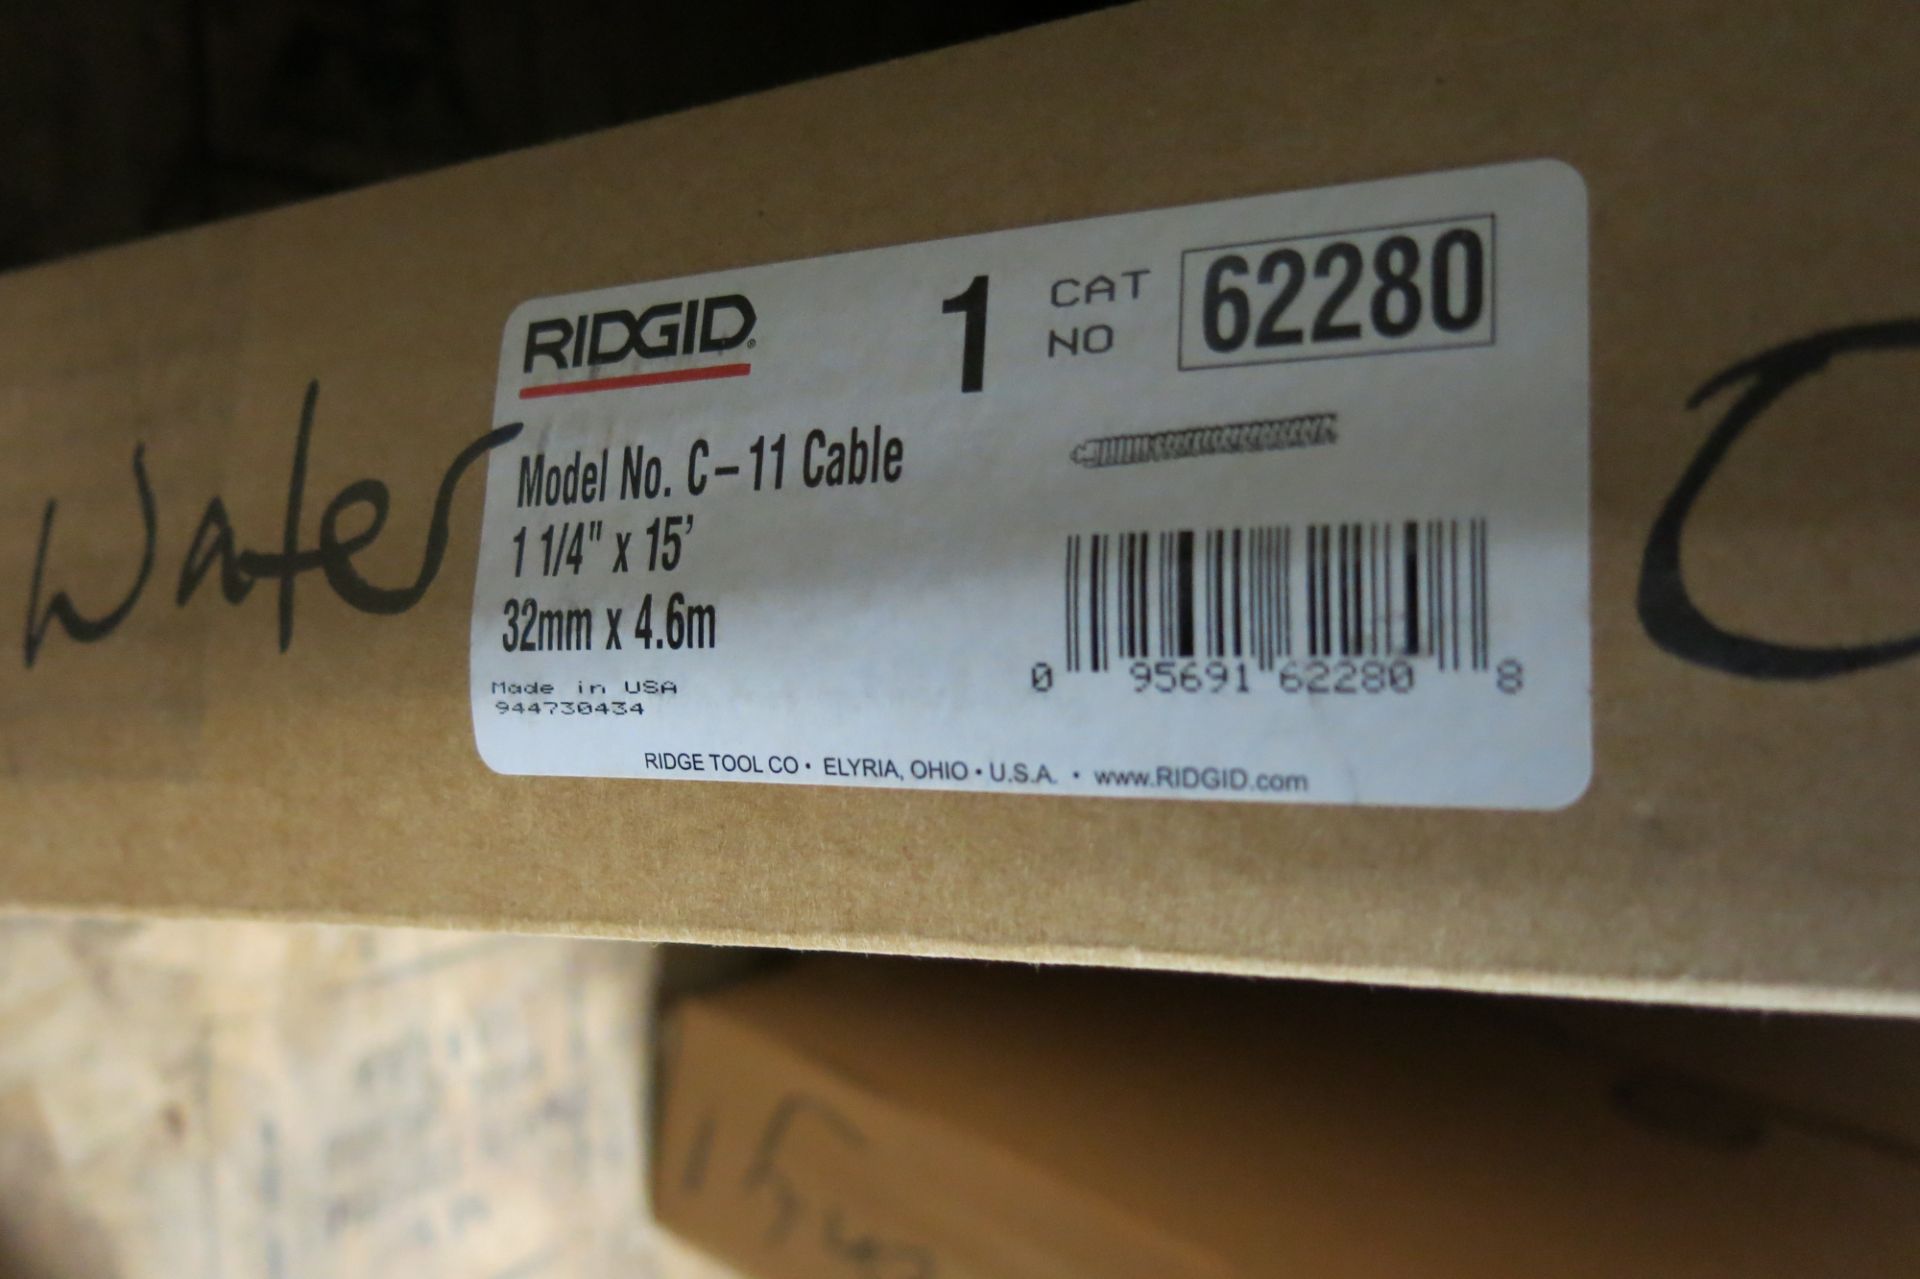 RIDGID, C-11, SEWER SECTIONAL CABLE, 1 1/4" X 15' - NEW (LOCATED IN MISSISSAUGA) - Image 2 of 2